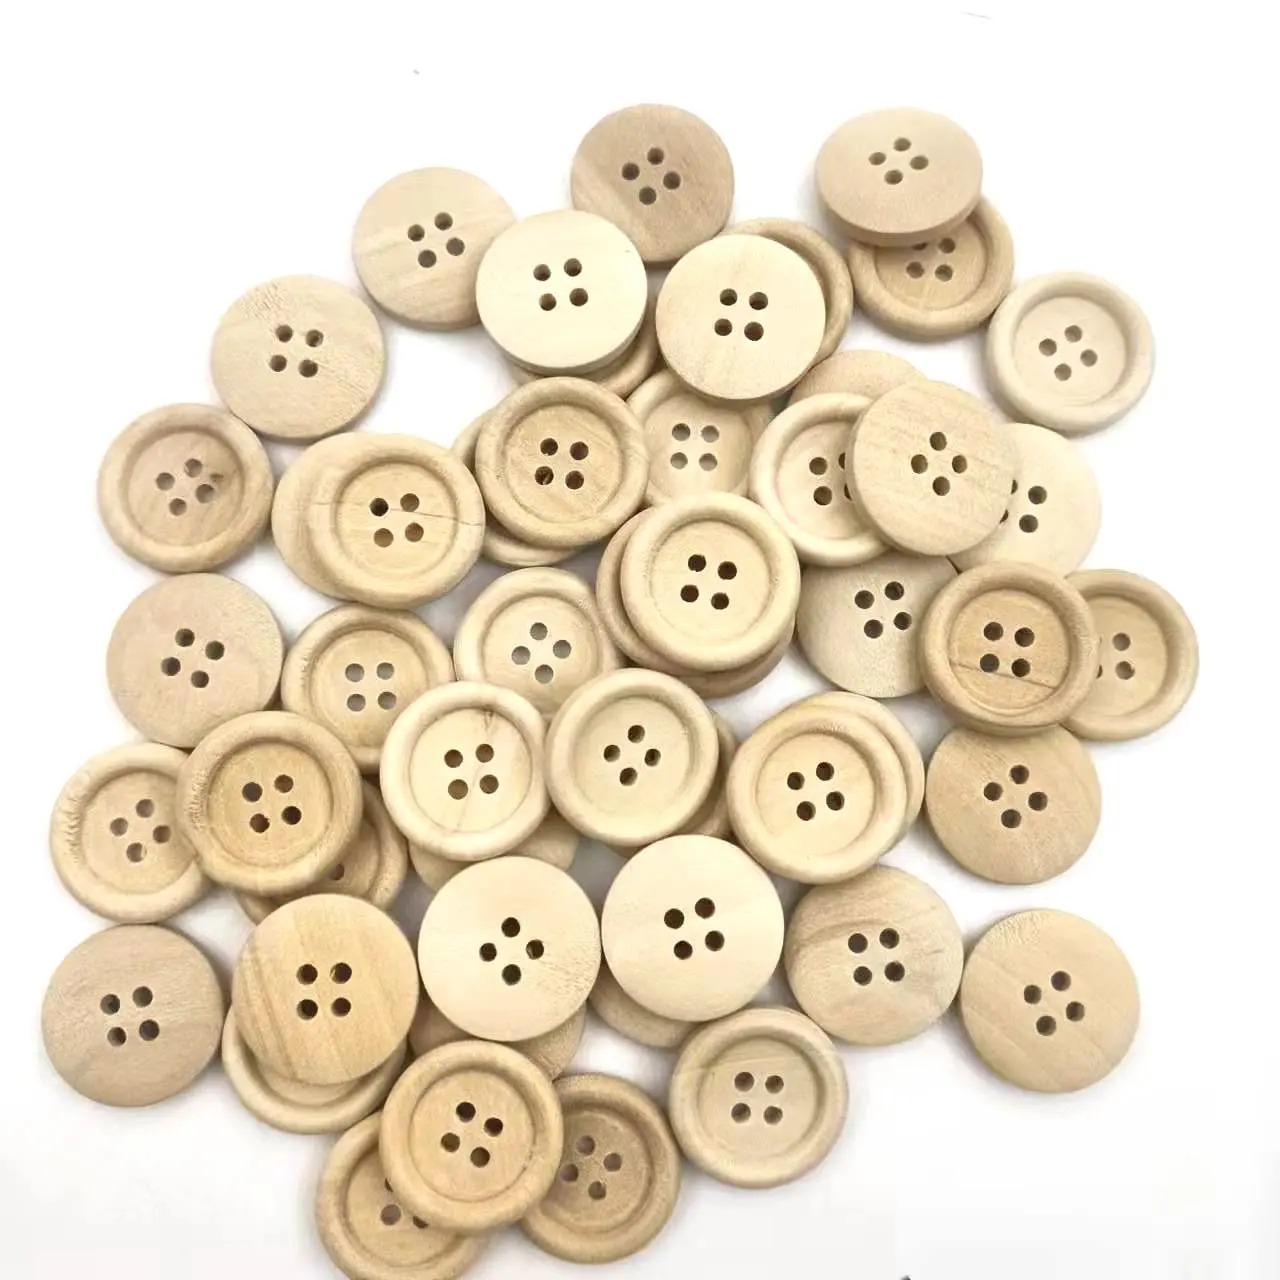 100pcs Natural Color Wooden Buttons in Bulk Round Decorative Wood Buttons 4 Holes